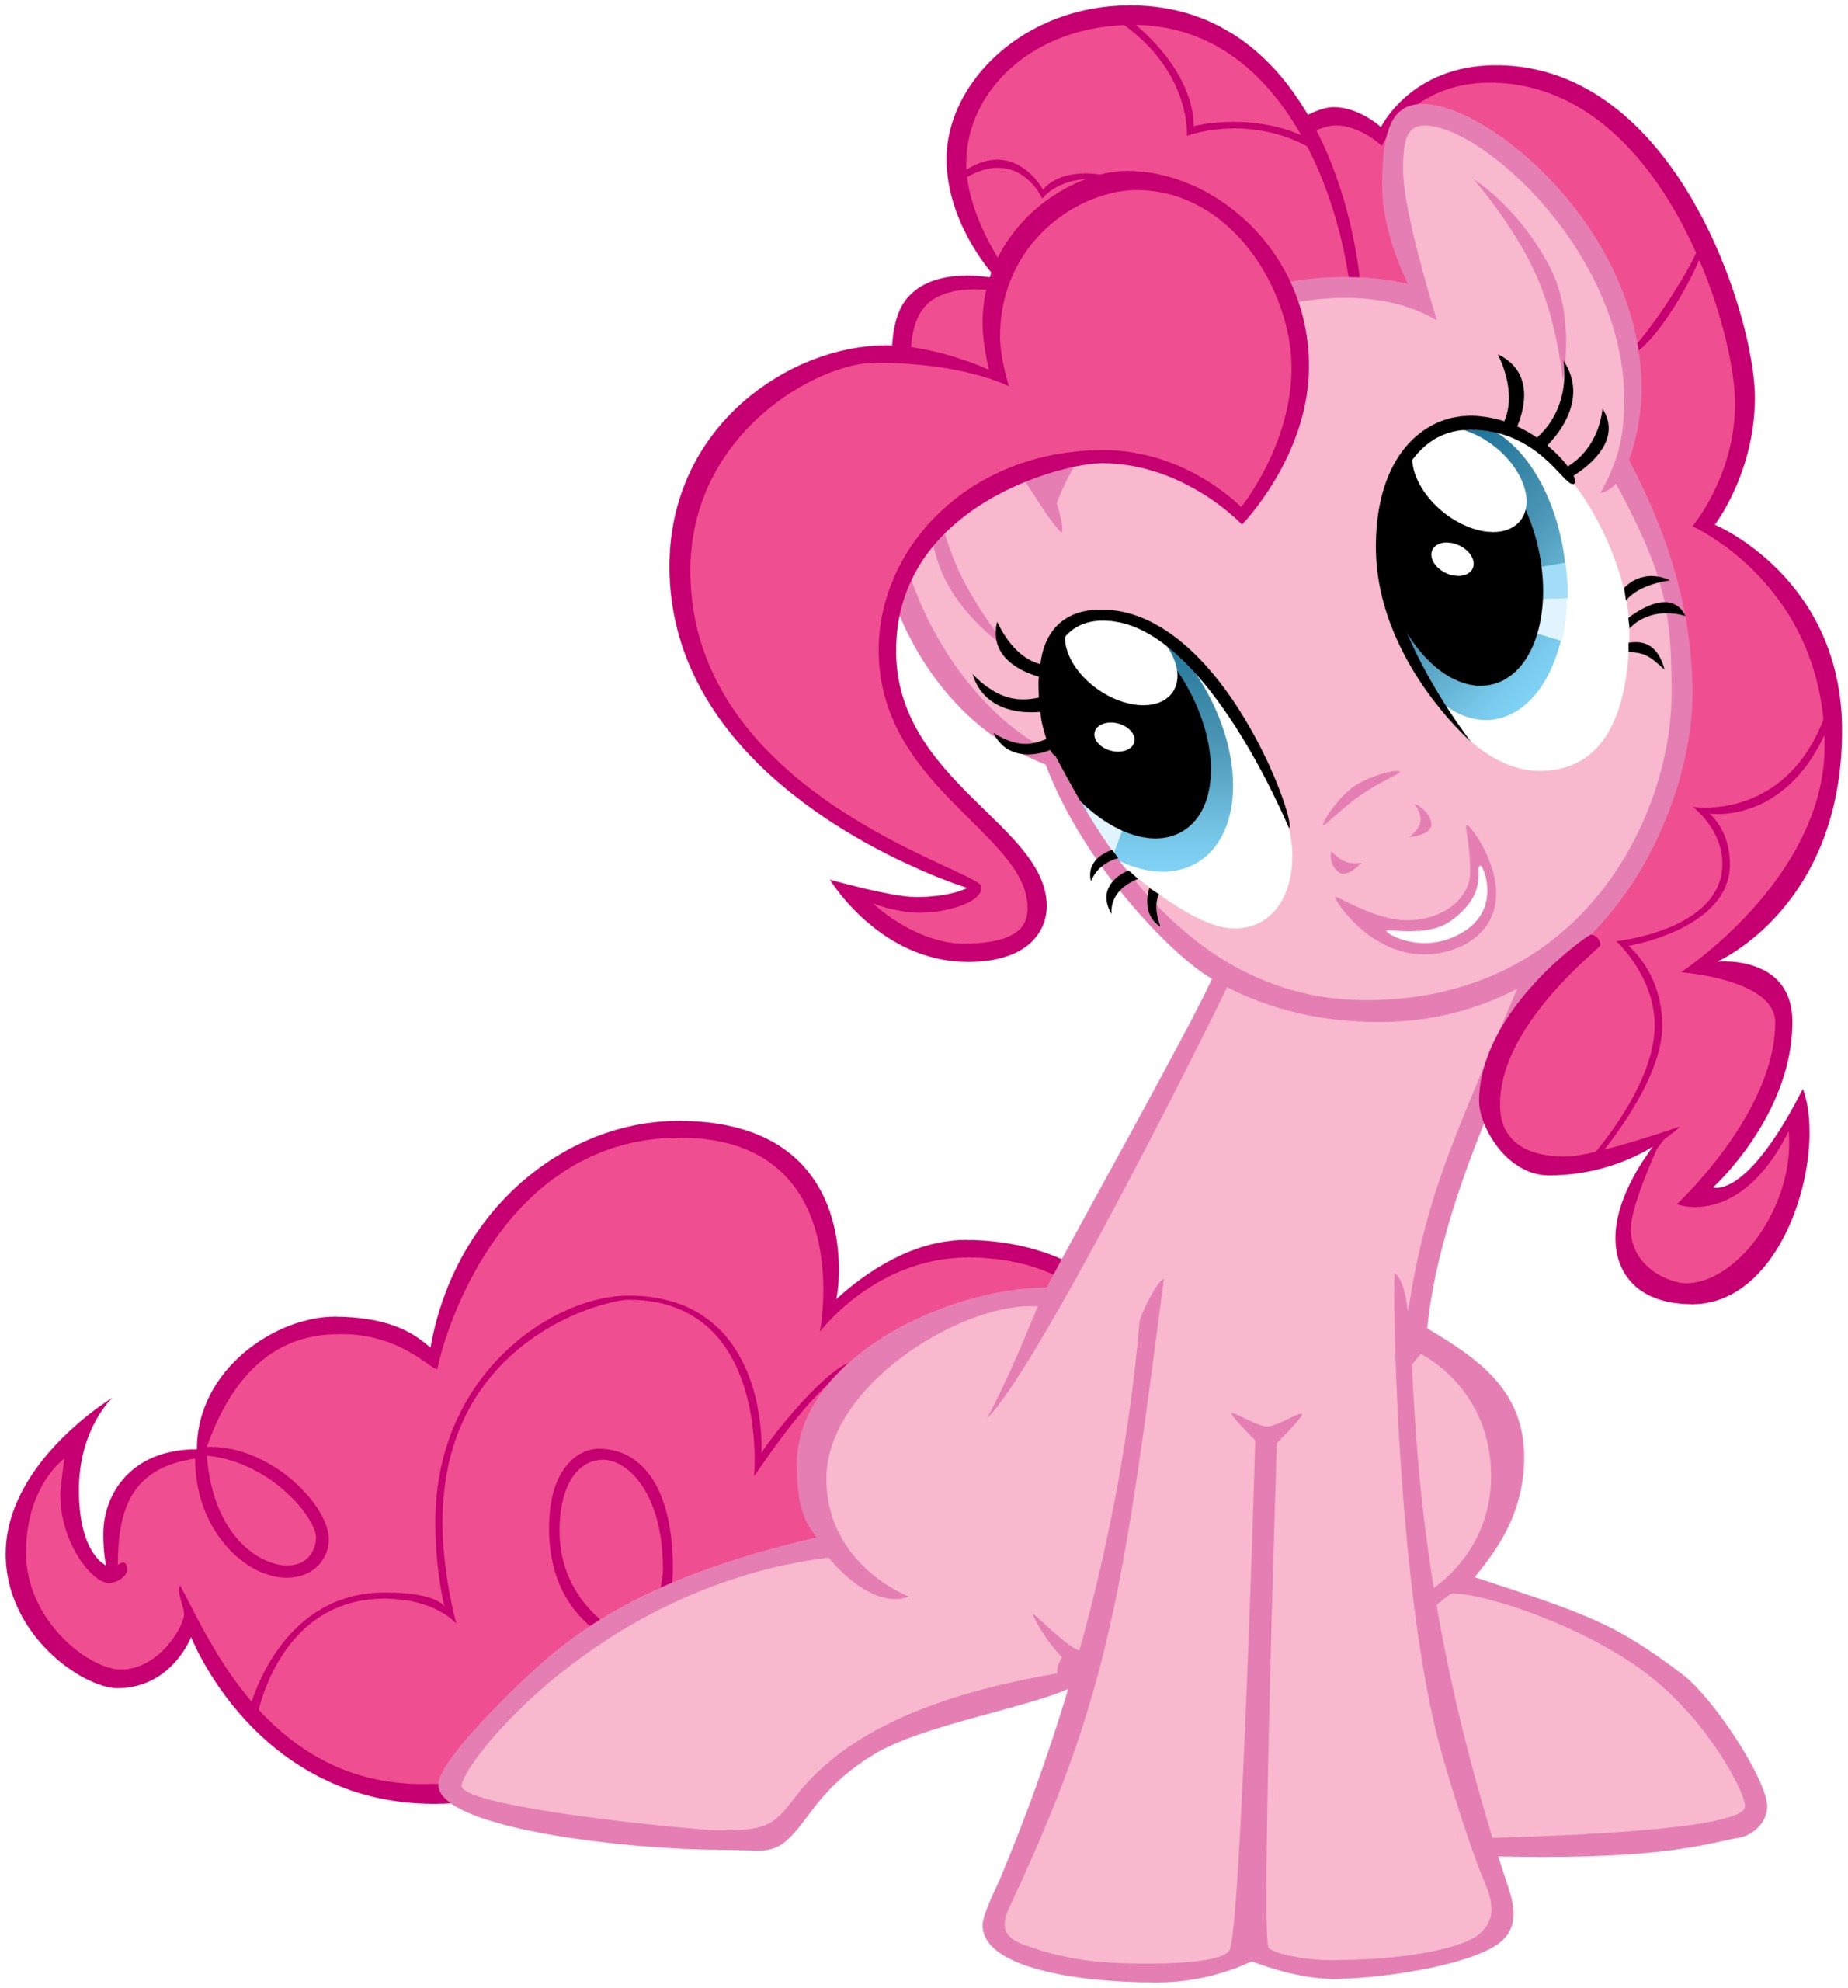 15-facts-about-pinkie-pie-my-little-pony-friendship-is-magic